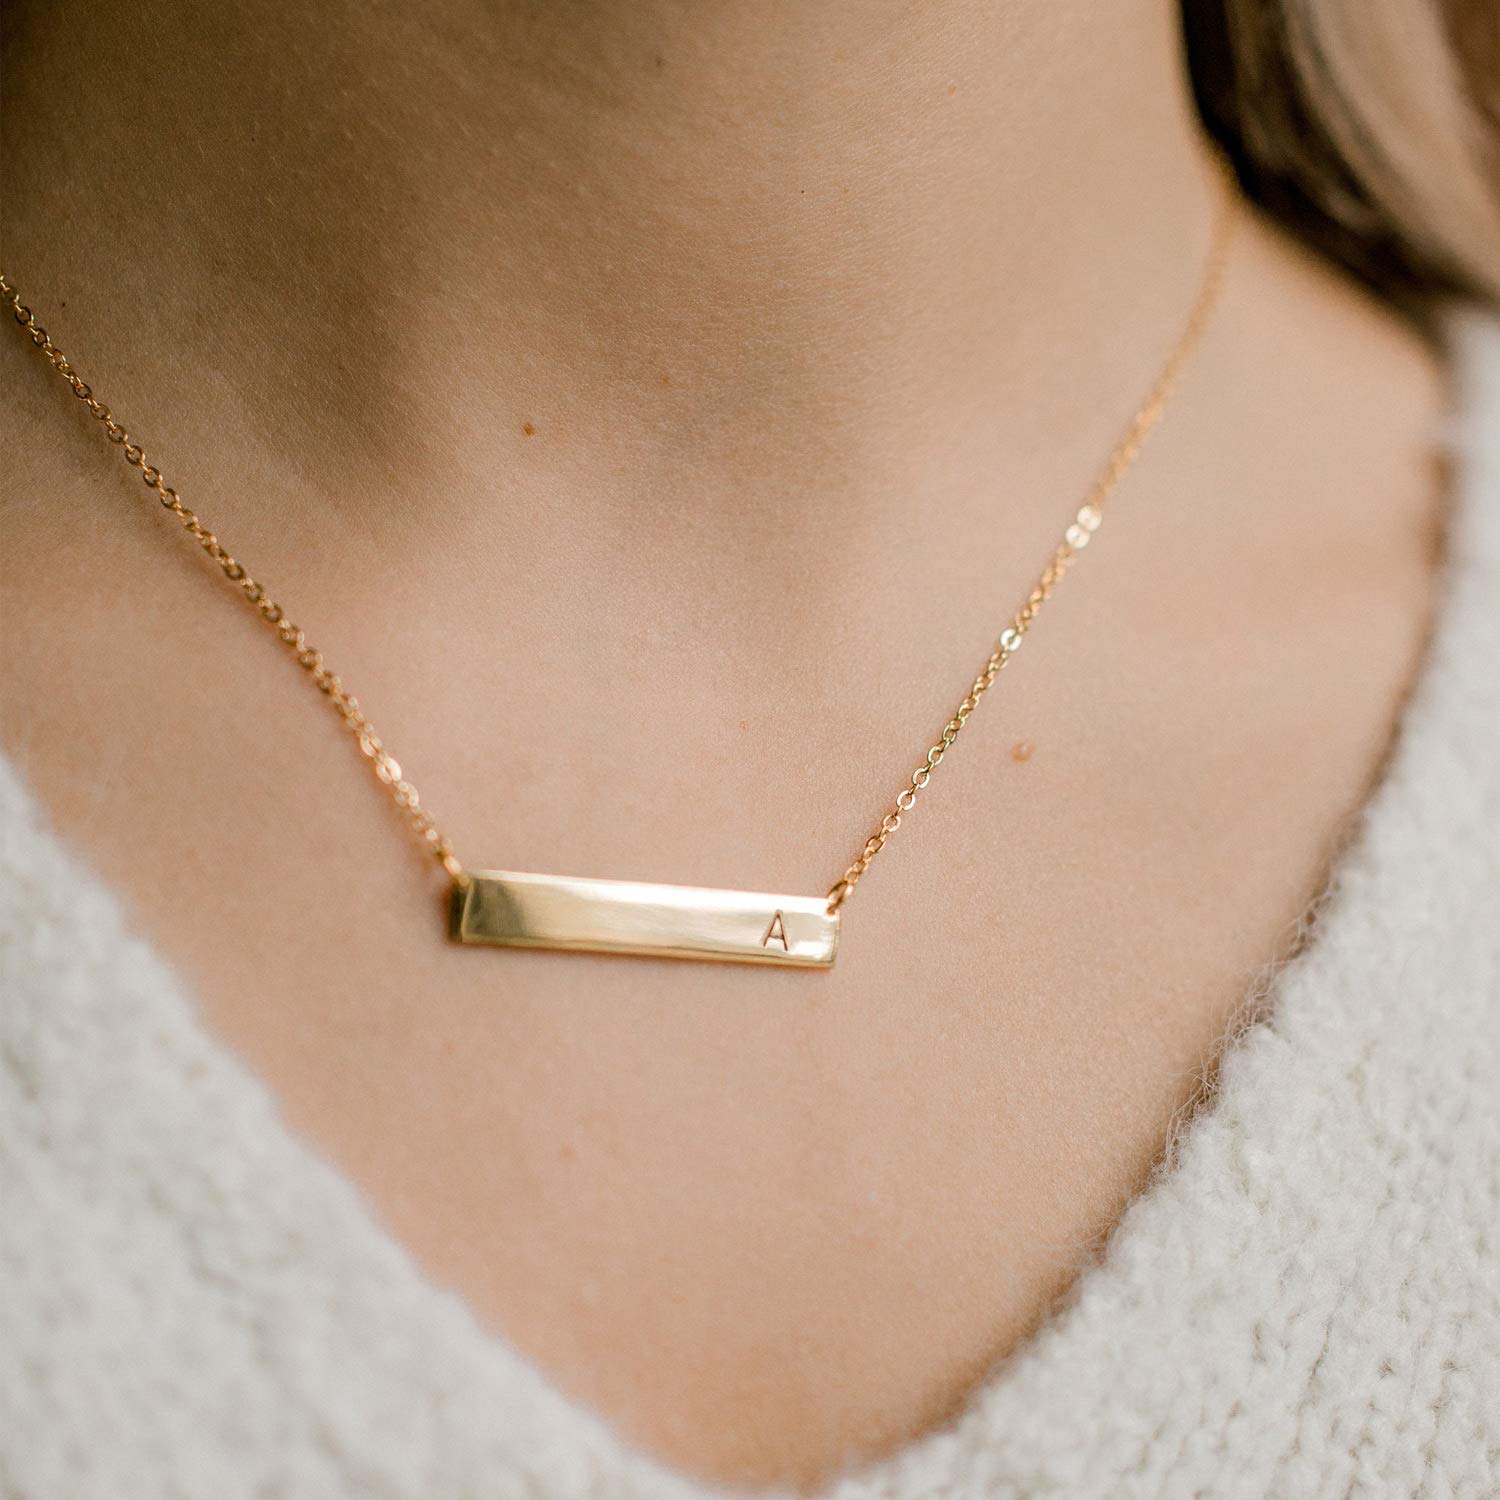 MOMOL Bar Pendant Initial Necklace, 18K Gold Plated Stainless Steel Bar Necklace Dainty Delicate Initial Necklace Simple Personalized Name Letter C Necklace for Women